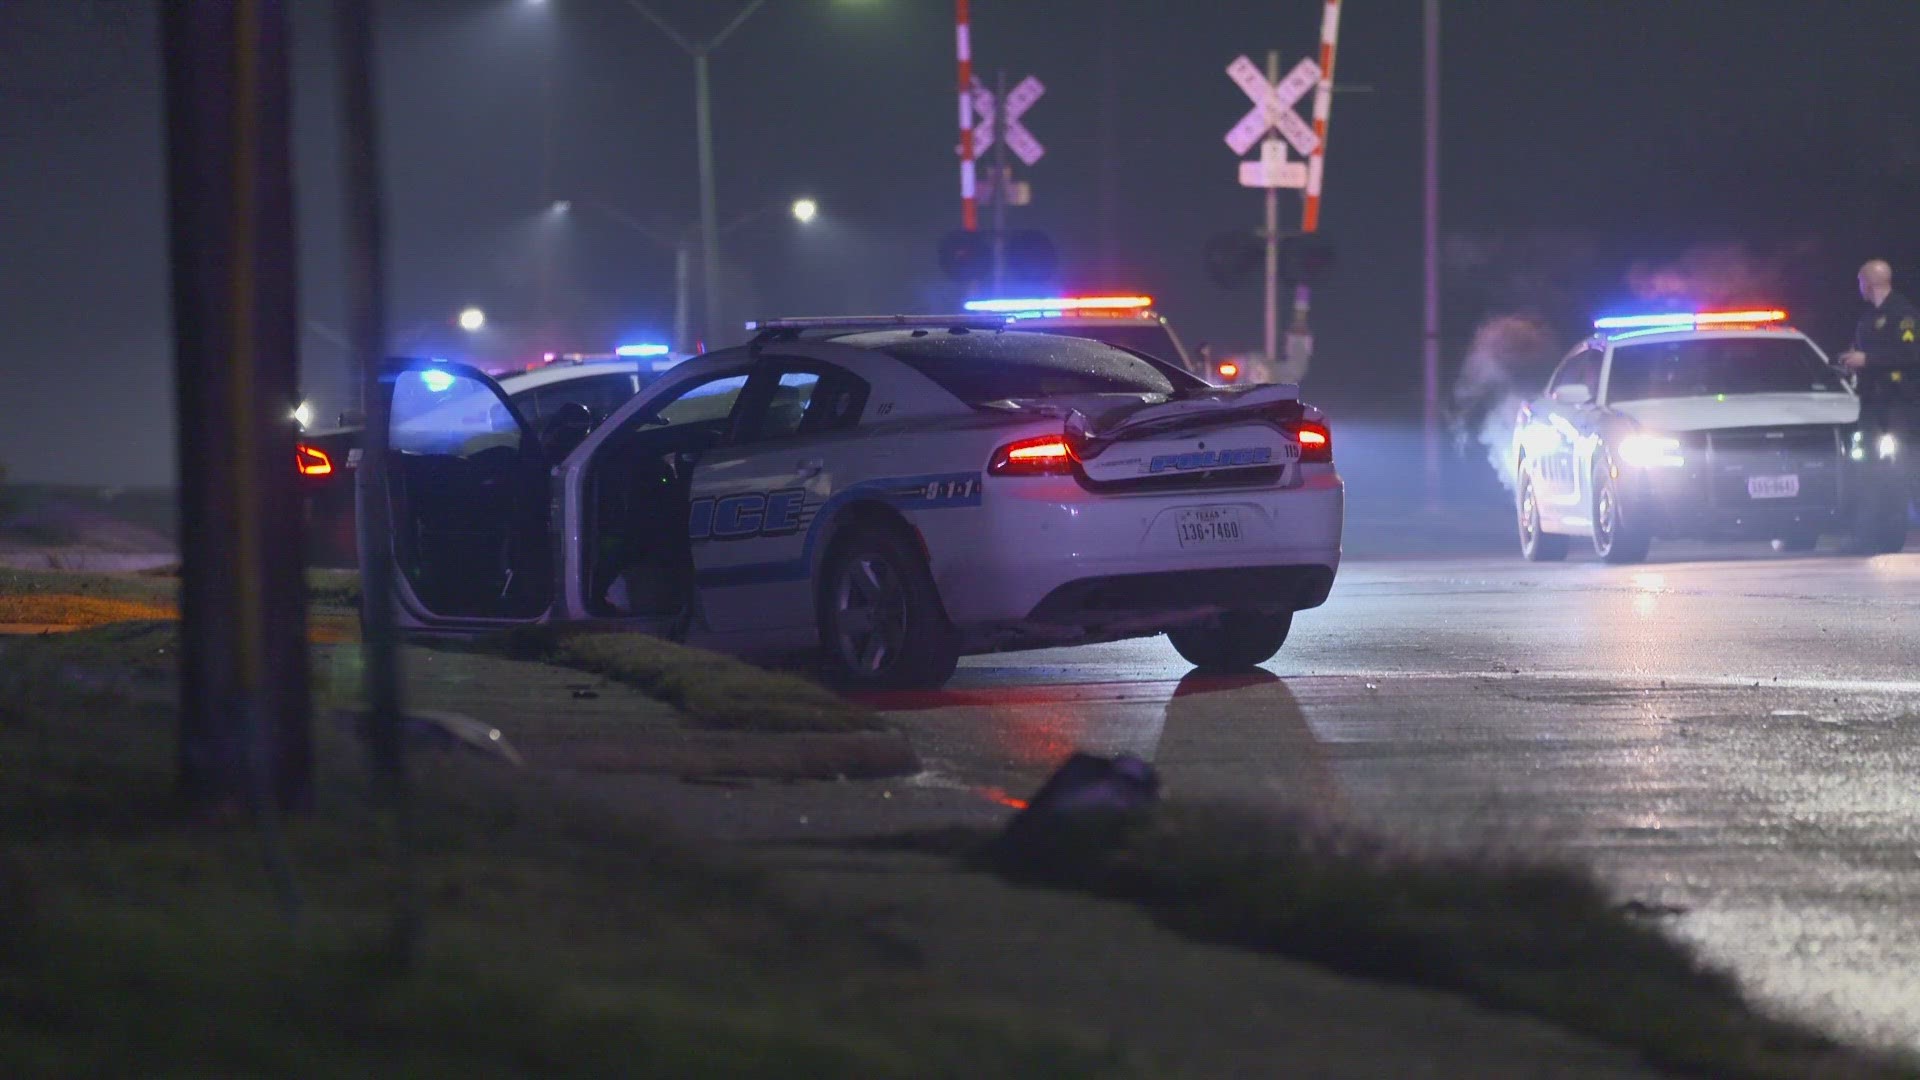 The squad car was pursuing a fleeing vehicle when it crashed into another in an intersection in Dallas, police said.